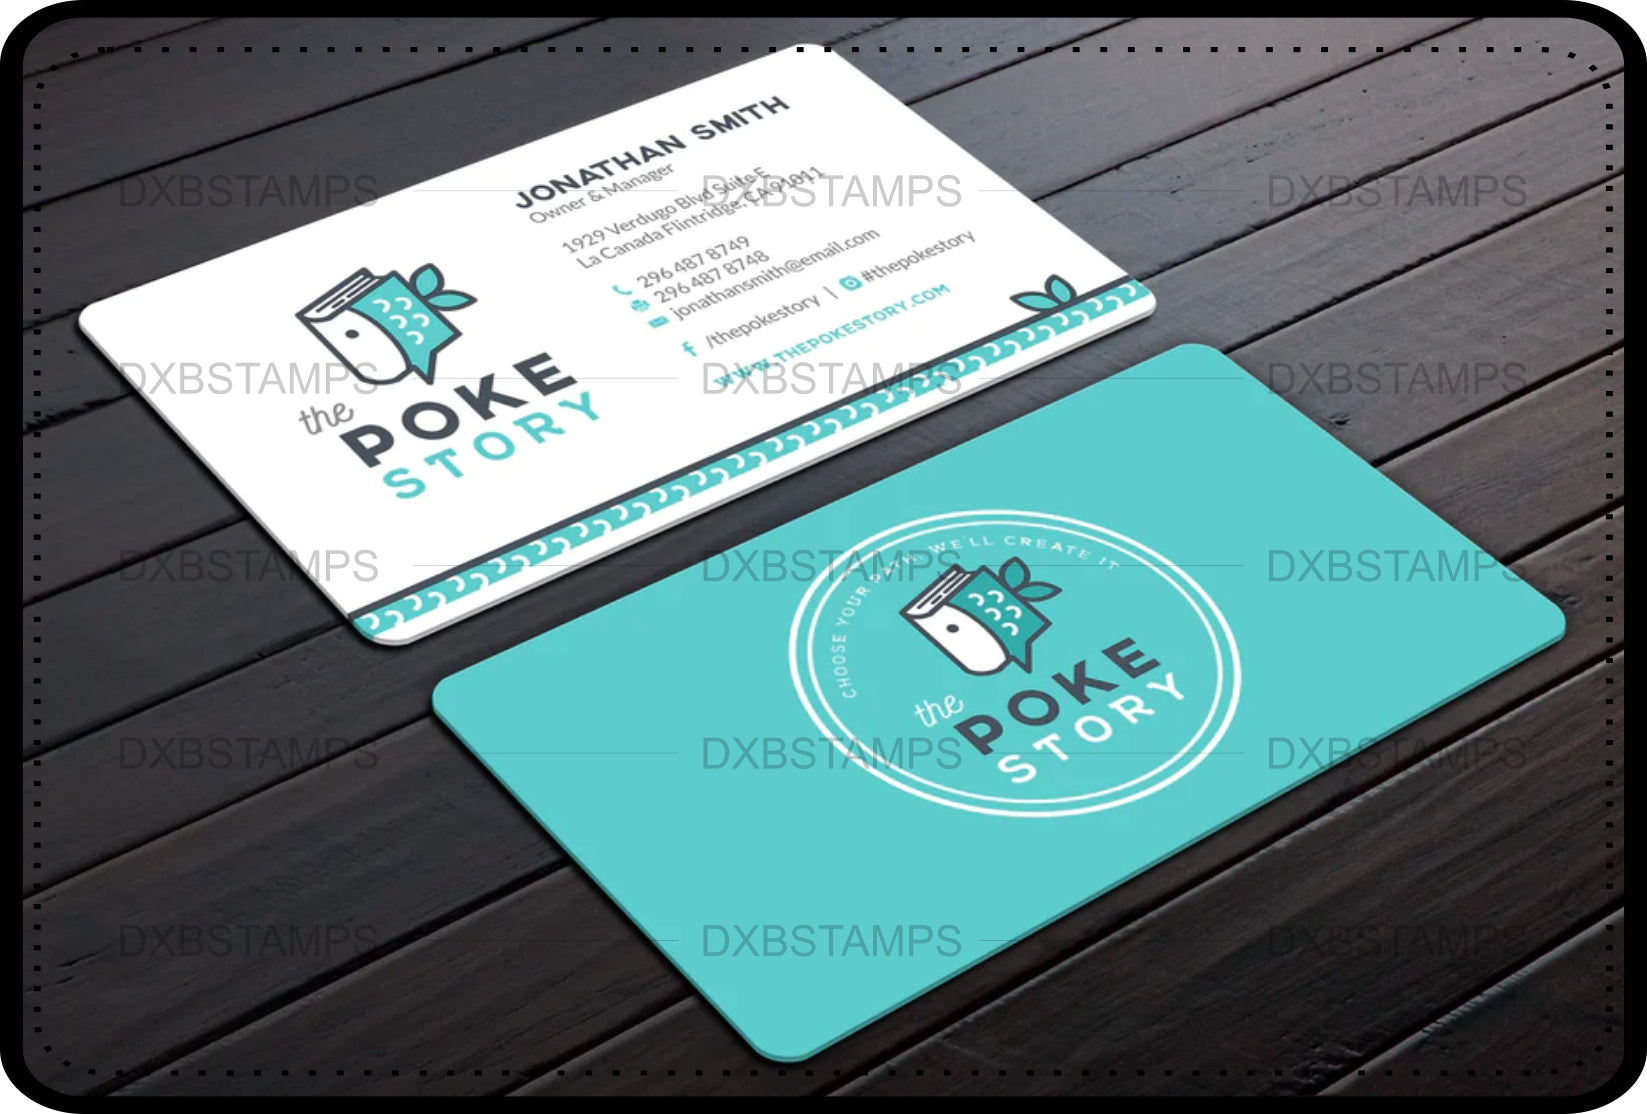 BUSINESS CARD